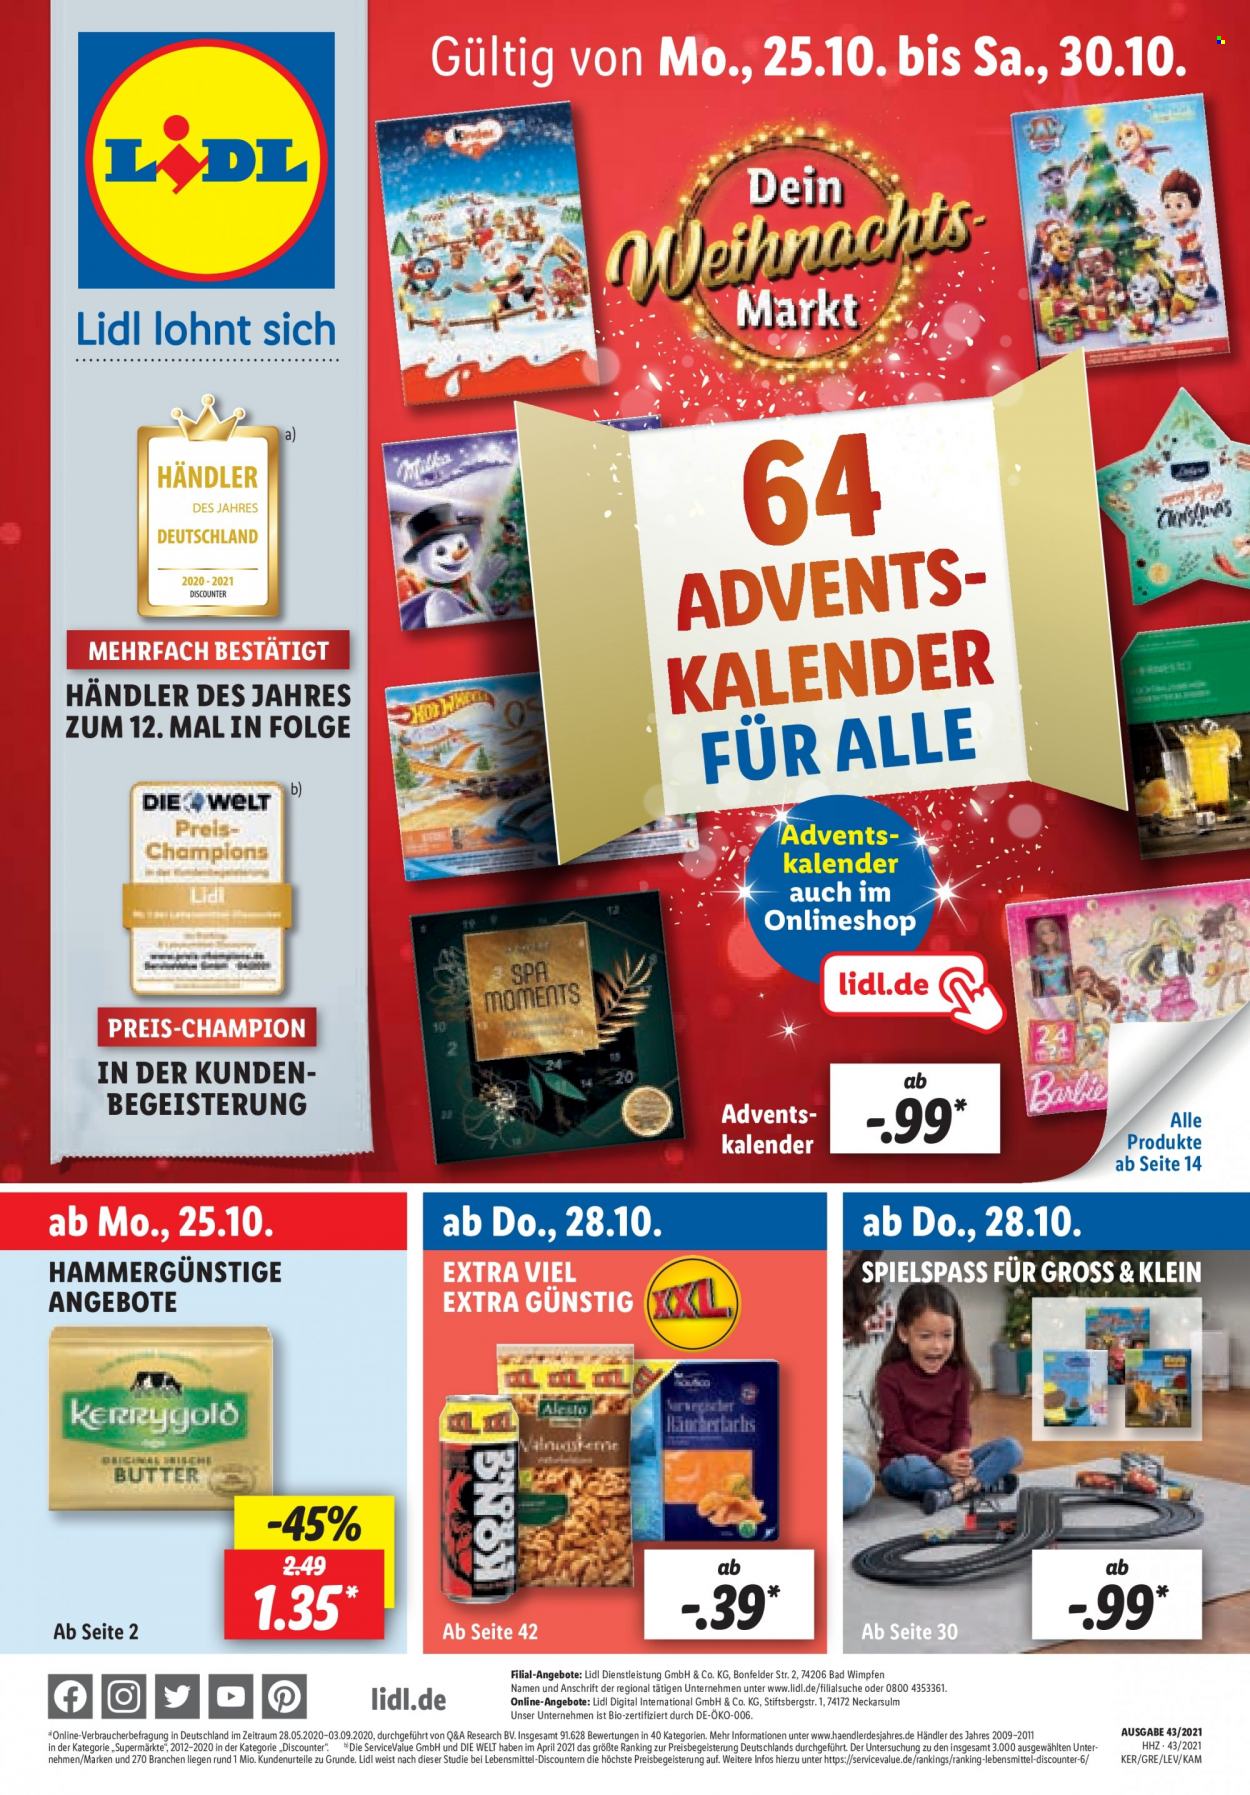 thumbnail - Prospekte Lidl - 25.10.2021 - 30.10.2021 - Produkte in Aktion - Kerrygold, Butter, Barbie. Seite 1.